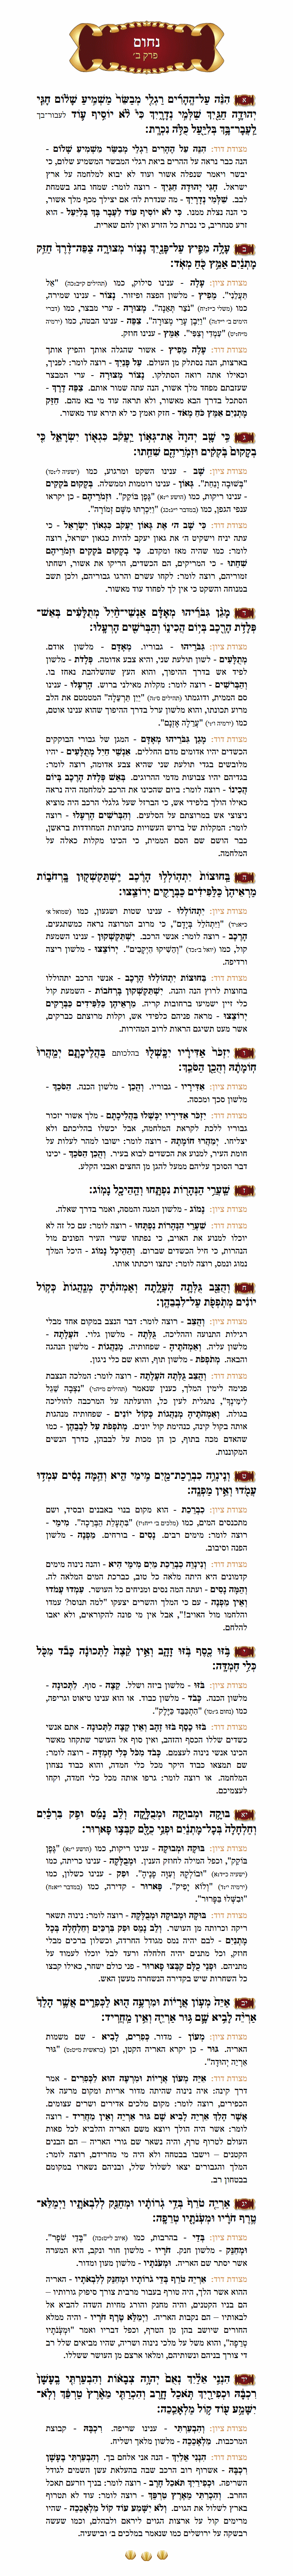 Sefer Nachum Chapter 2 with commentary